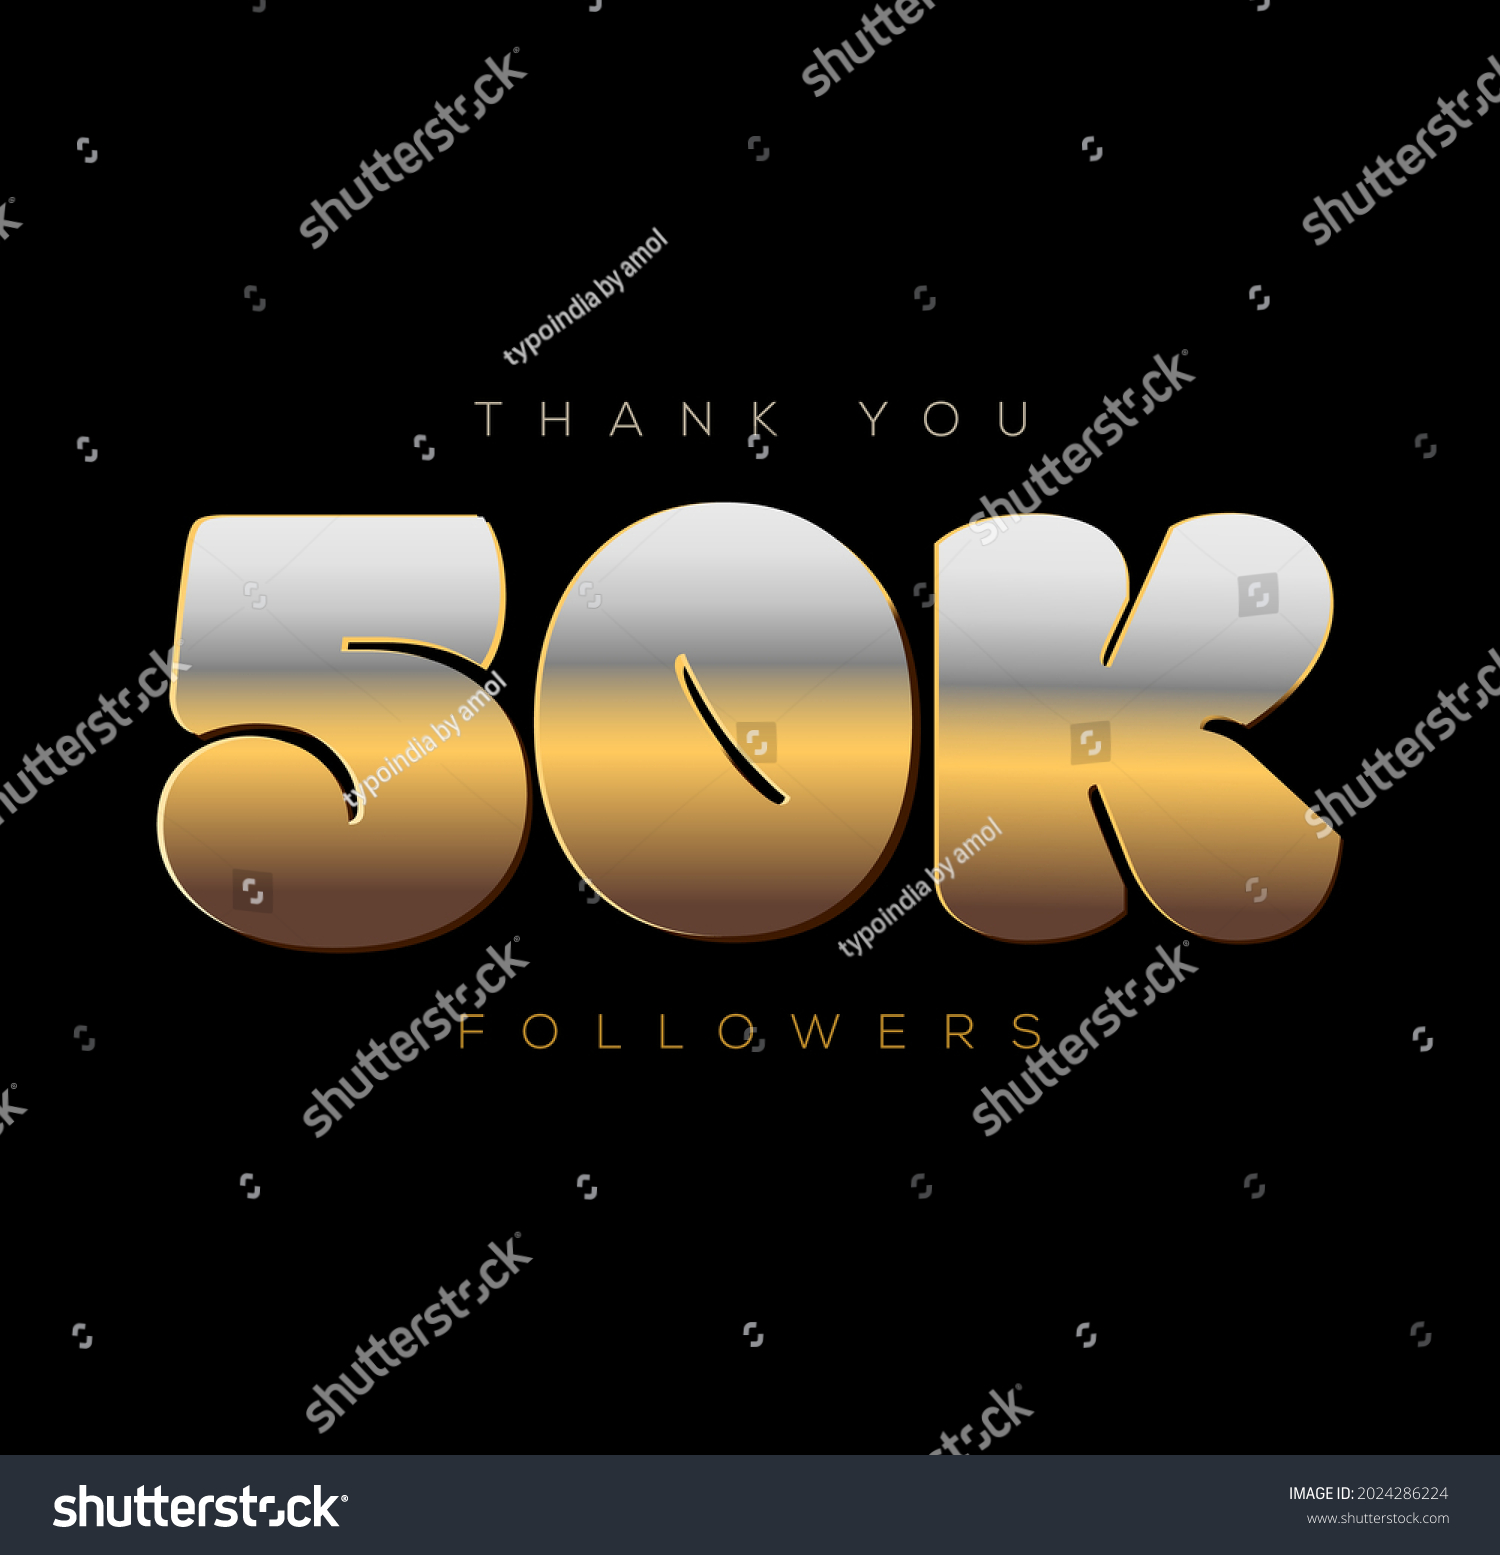 Thank You 50k Followers Thanking Post Stock Vector Royalty Free 2024286224 2742